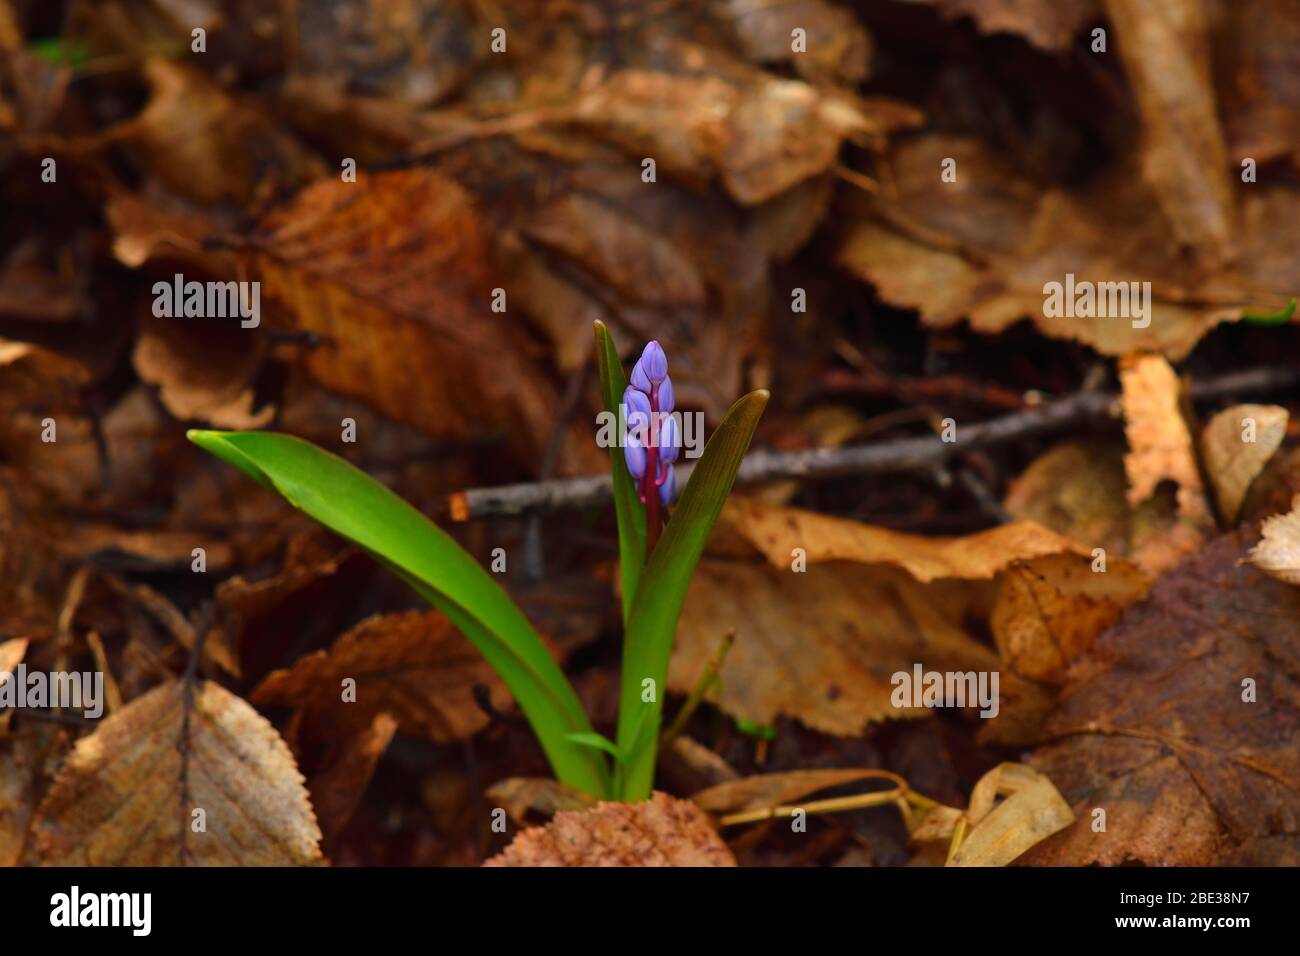 Beautiful scilla flower on a brown leaves background. Violet to gentian-blue gradient. Centered. Stock Photo